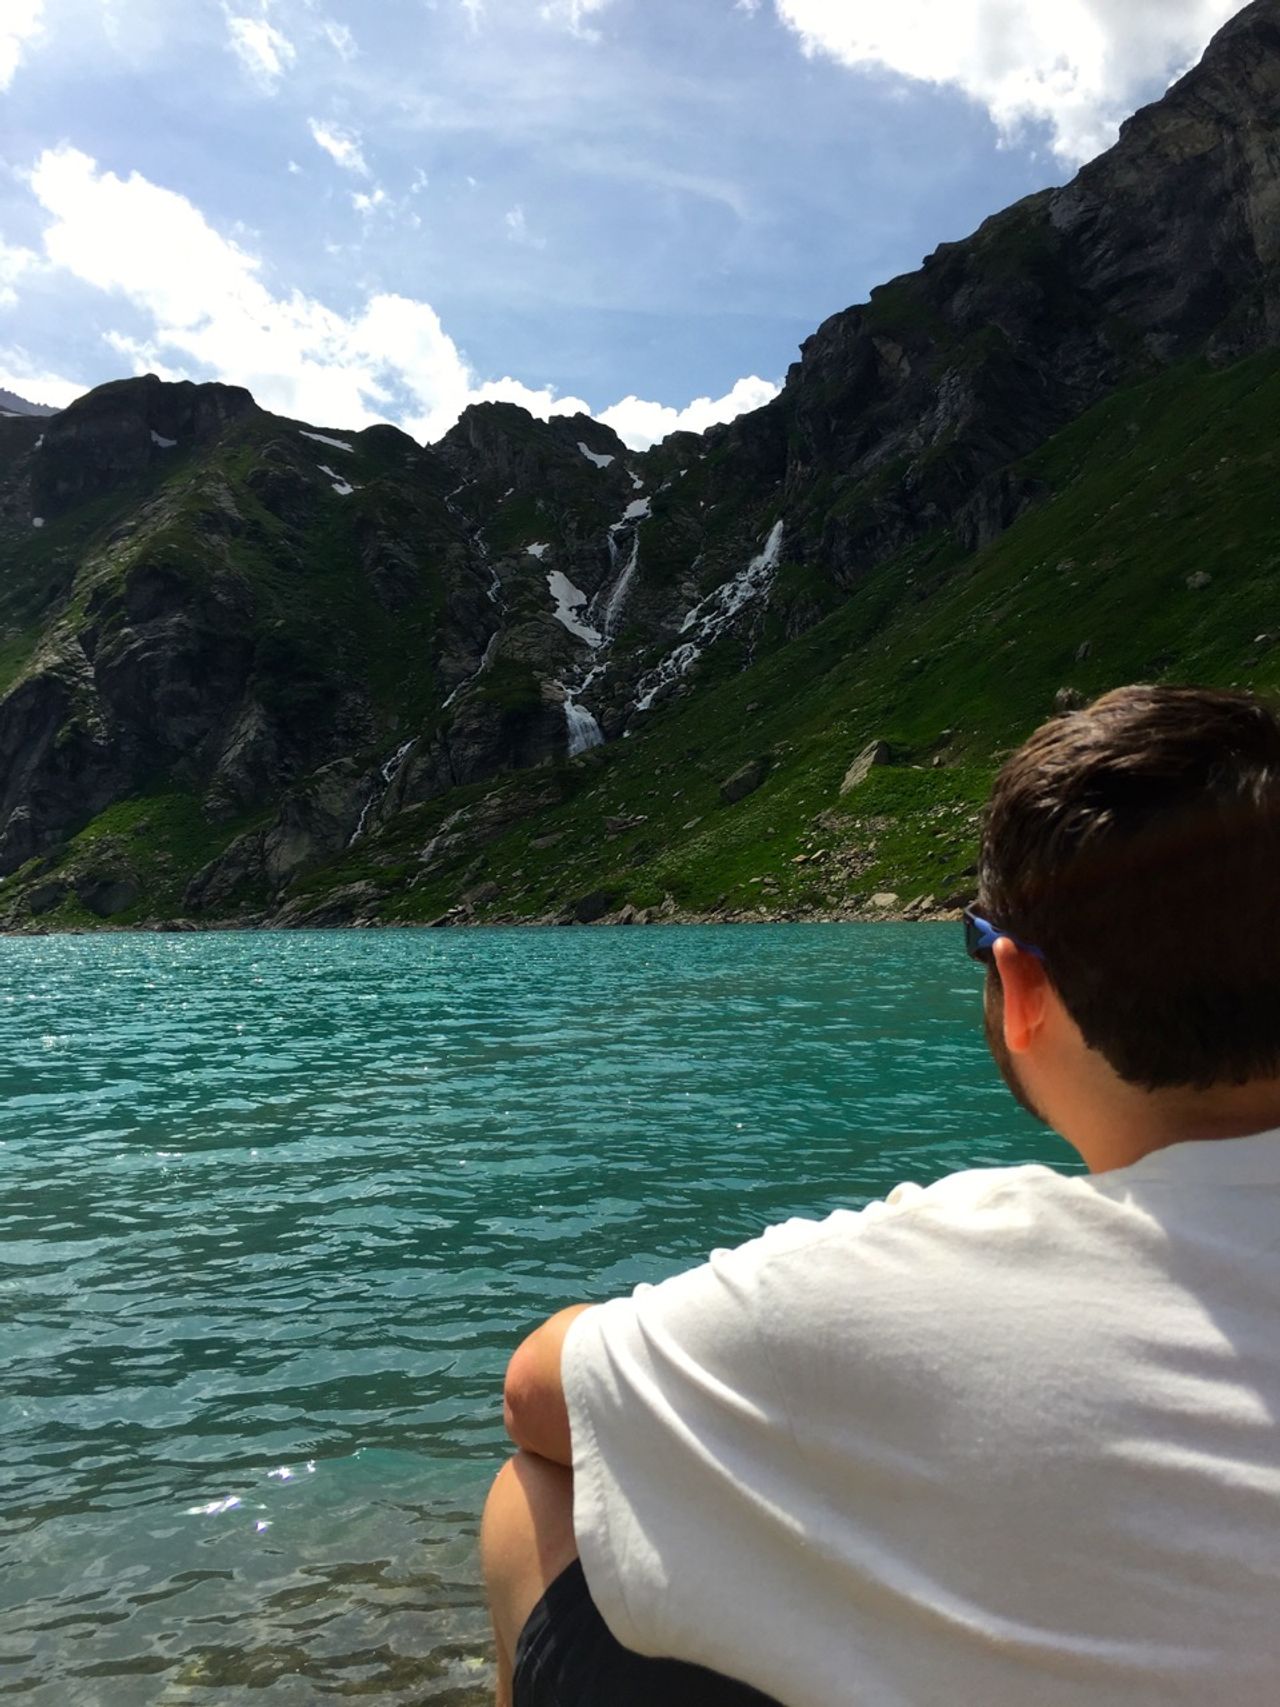 Man overlooking a glacier-fed reservior in the Swiss Alps.